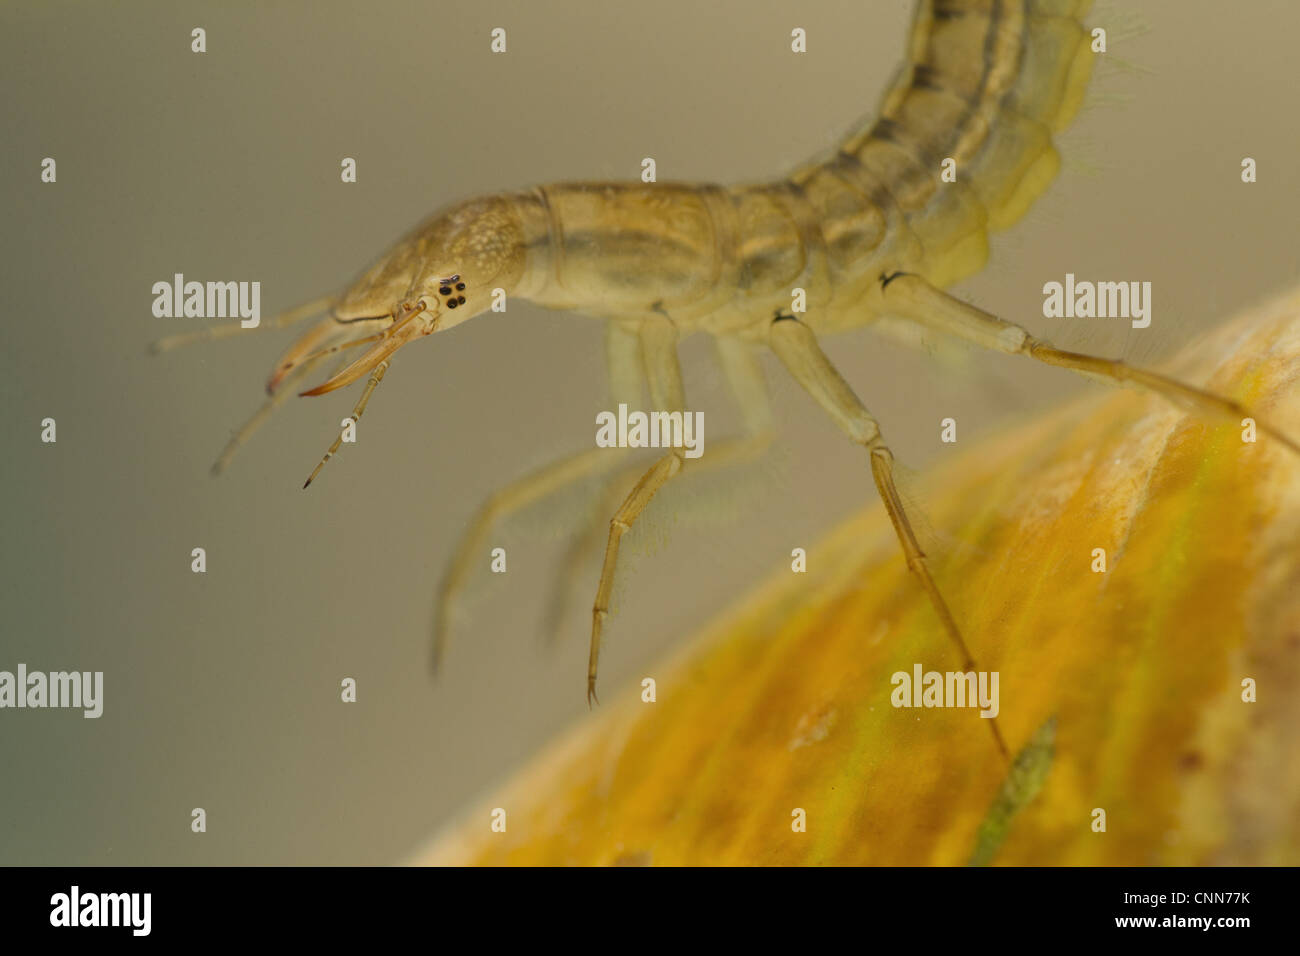 Great Diving Beetle (Dytiscus marginalis) larva, close-up of head and legs, Derbyshire, England, july Stock Photo